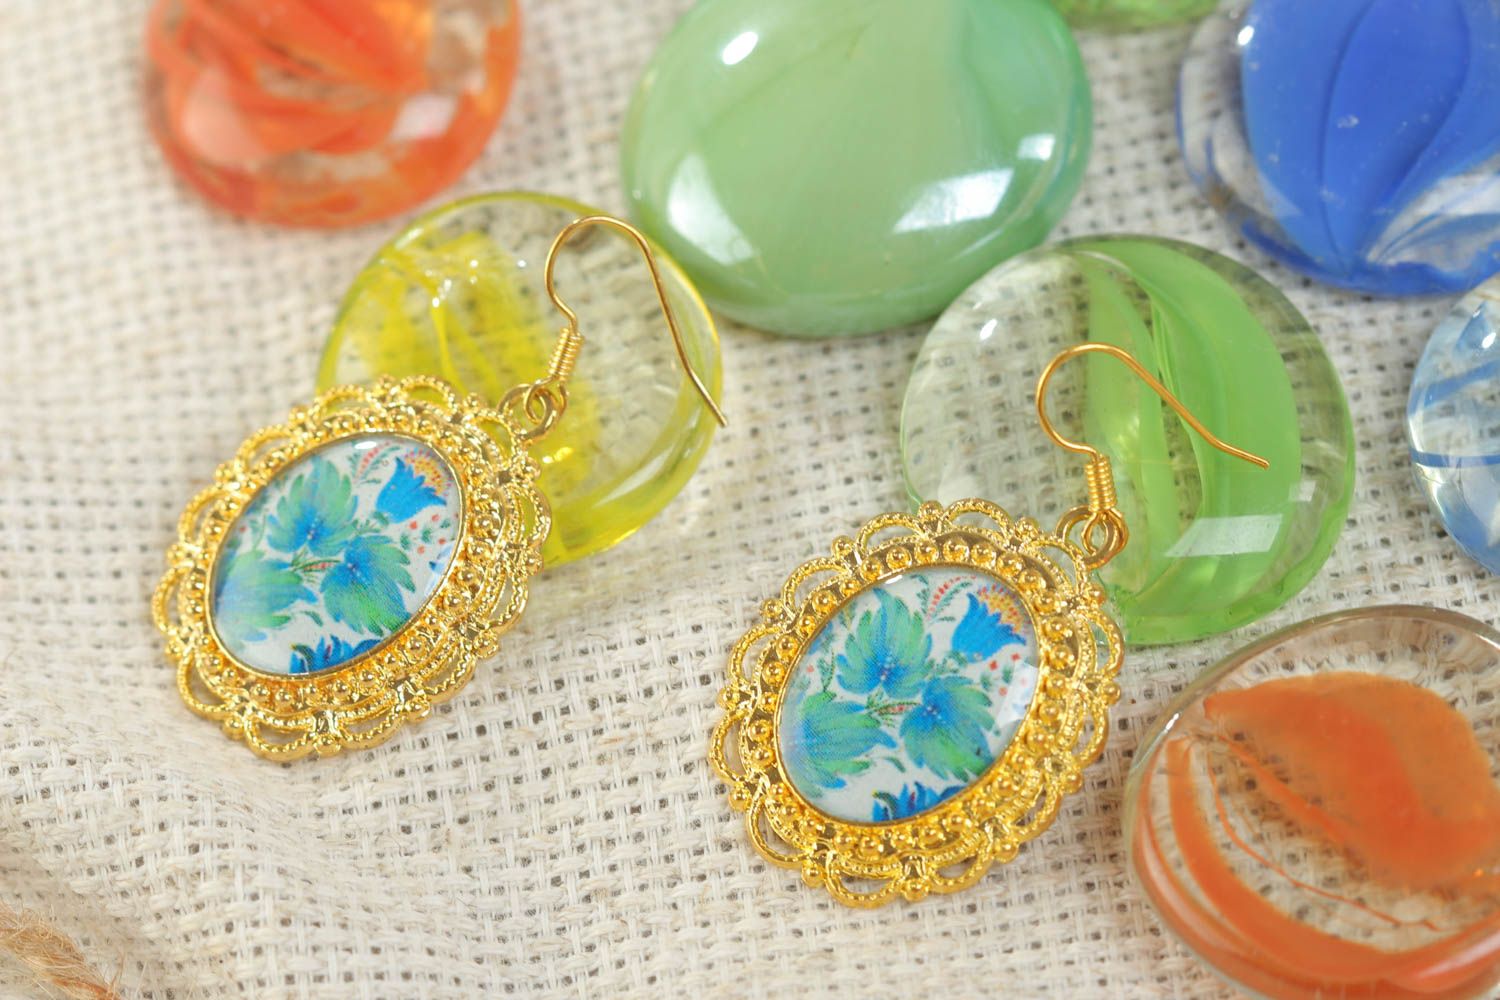 Handmade oval floral earrings with golden colored metal basis and glass glaze photo 1